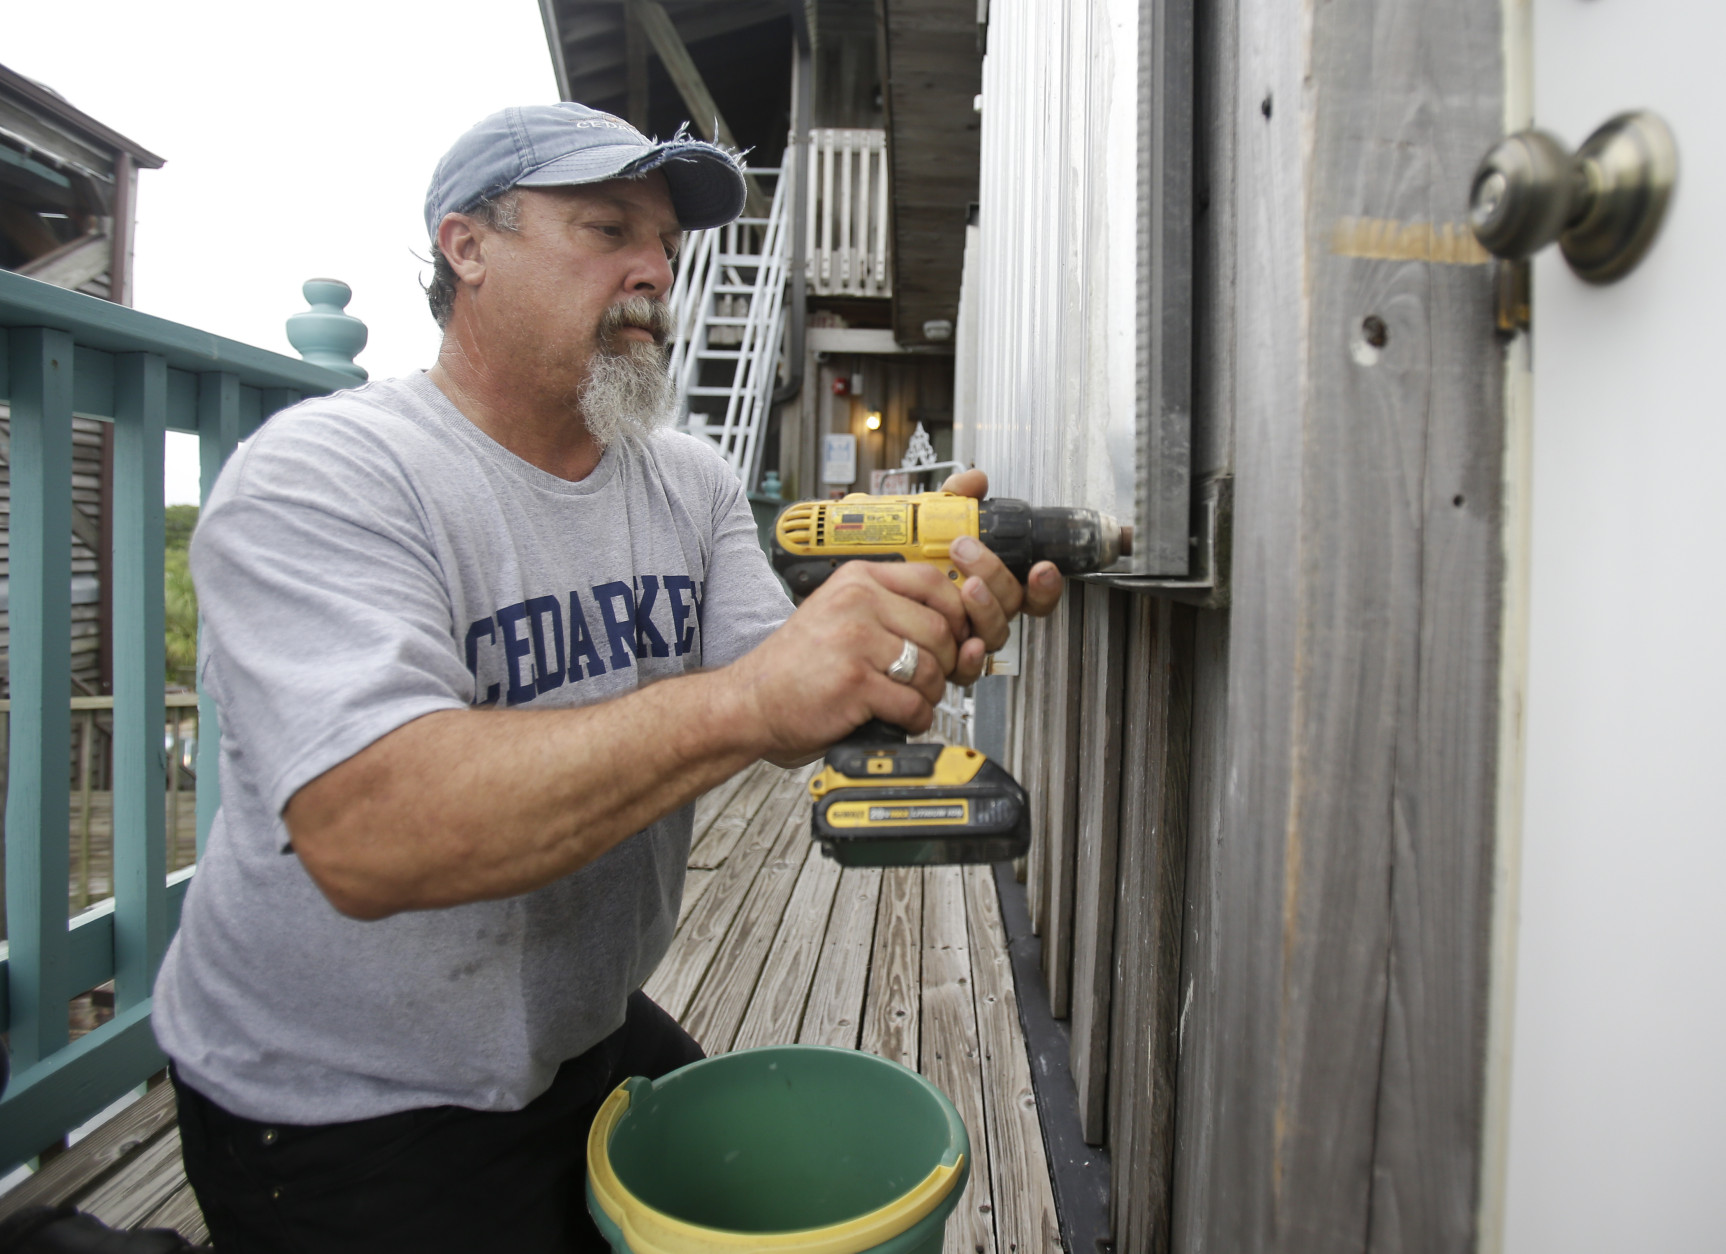 Tony Frazier installs storm shutters on a building in preparation for Tropical Storm Hermine, Thursday, Sept. 1, 2016, in Cedar Key, Fla. (AP Photo/John Raoux)